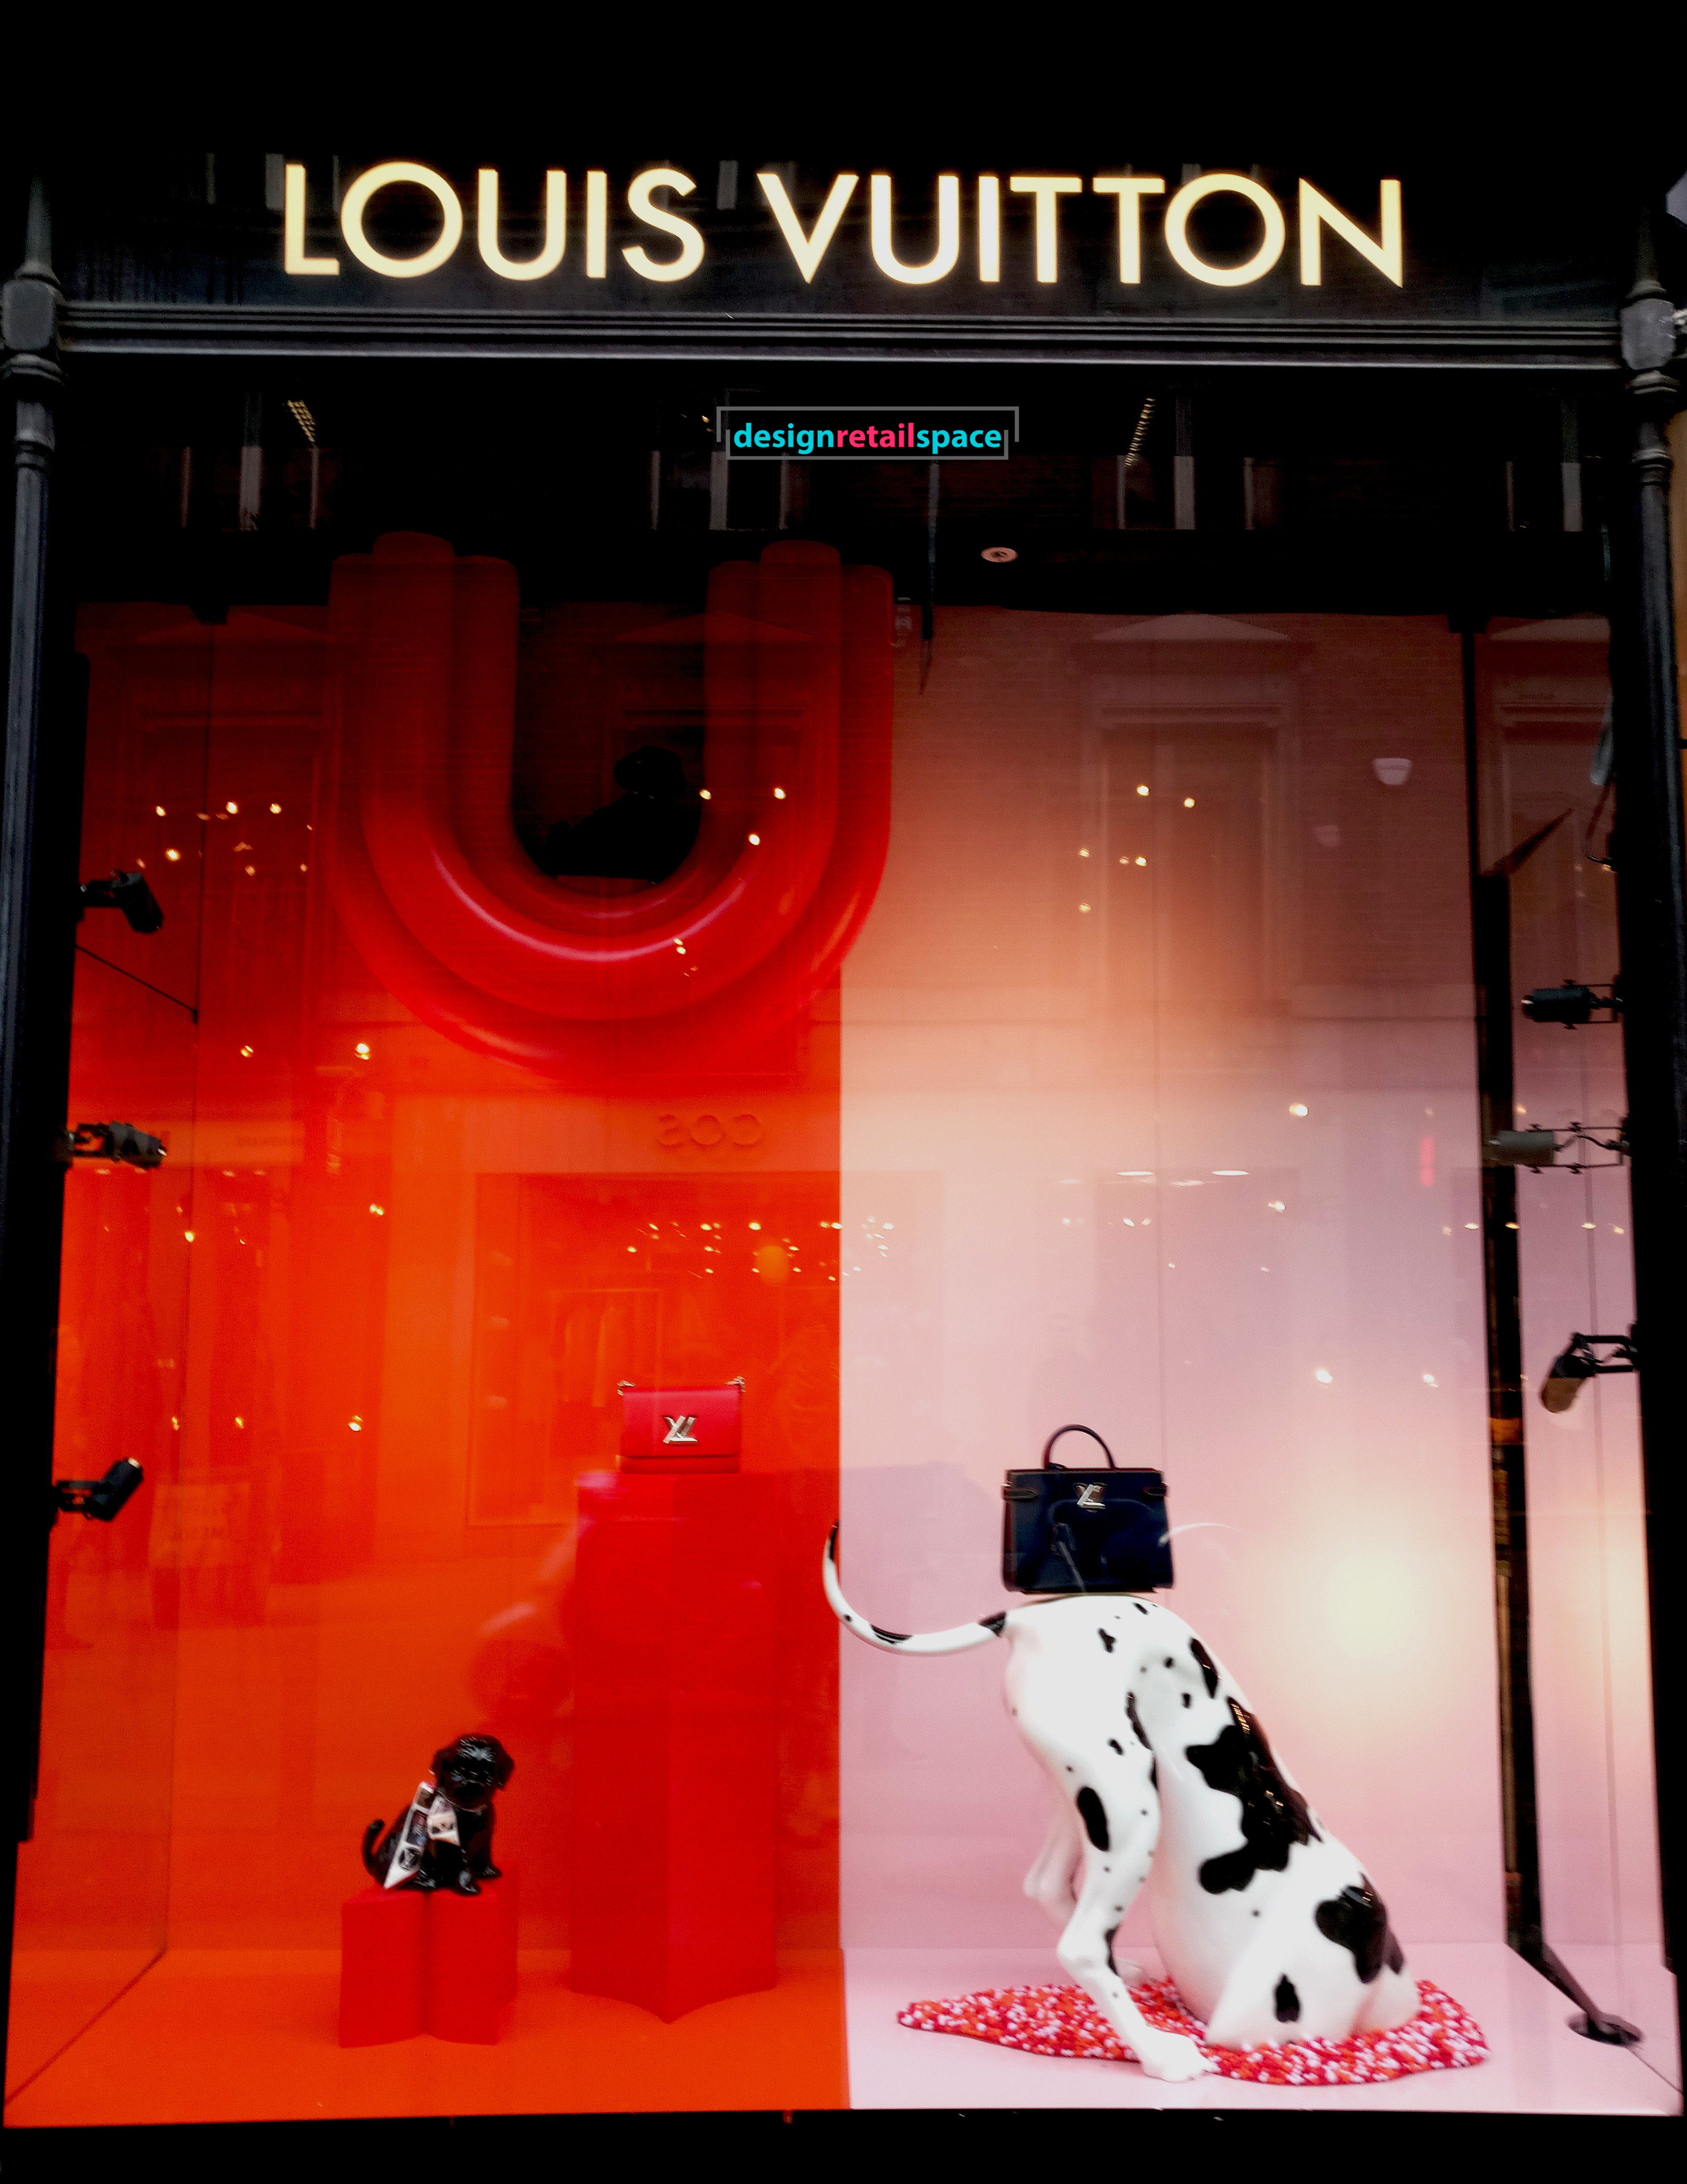 Louis Vuitton window display presenting Dalmatian digging against Millennial pink and red background